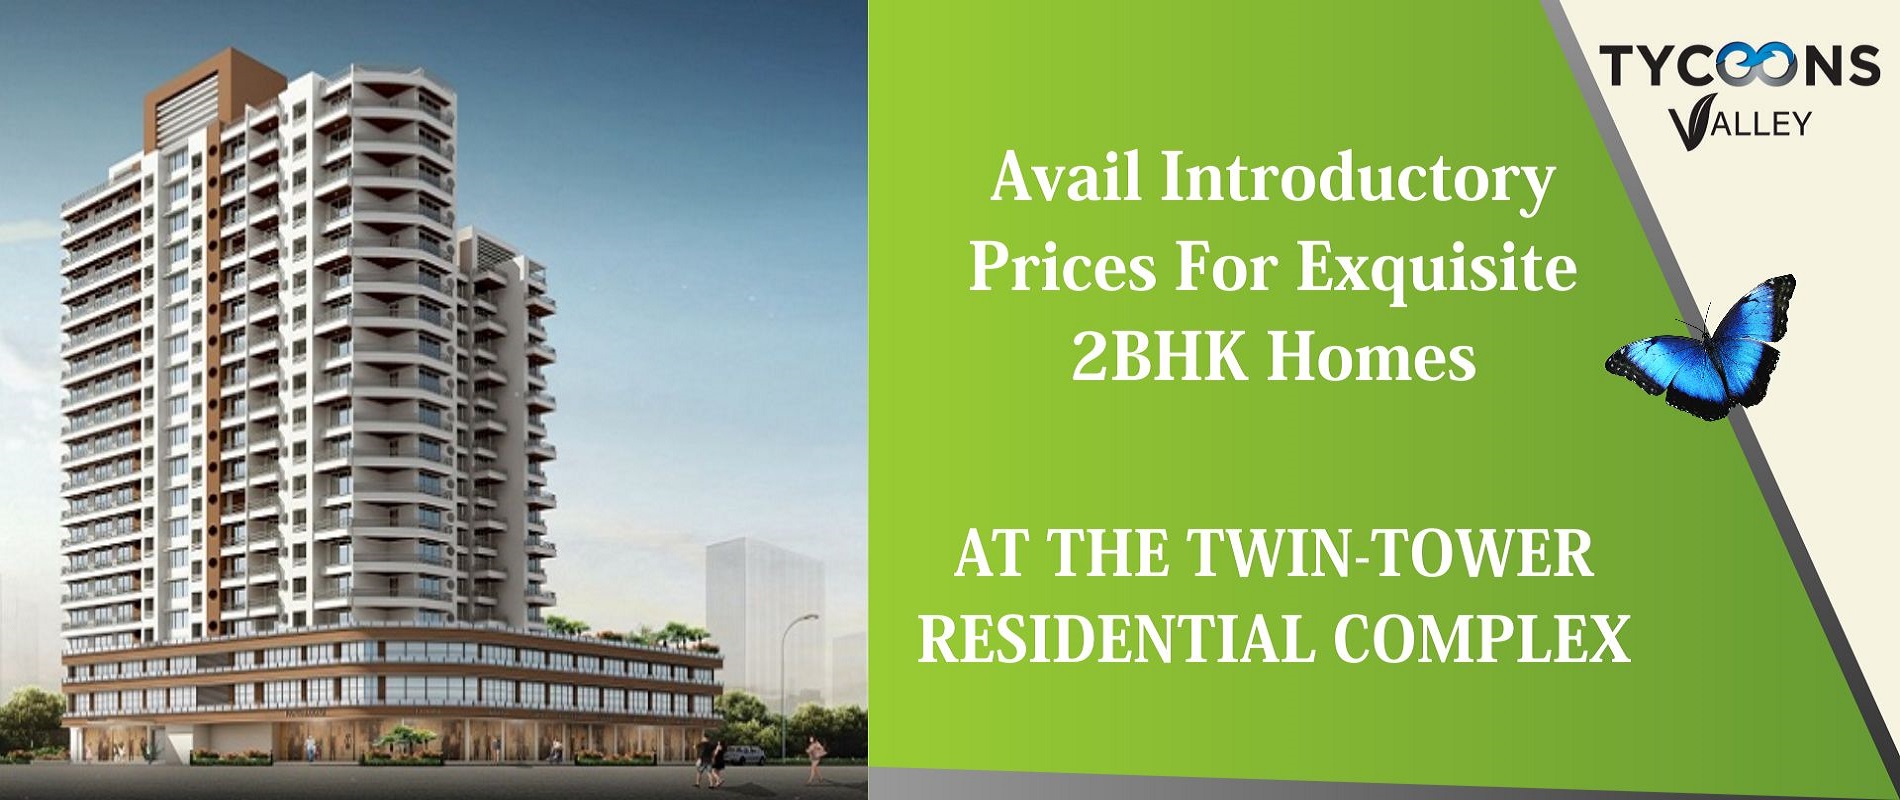 Tycoons Offers 2 and 3 Bhk Apartments in Kalyan West